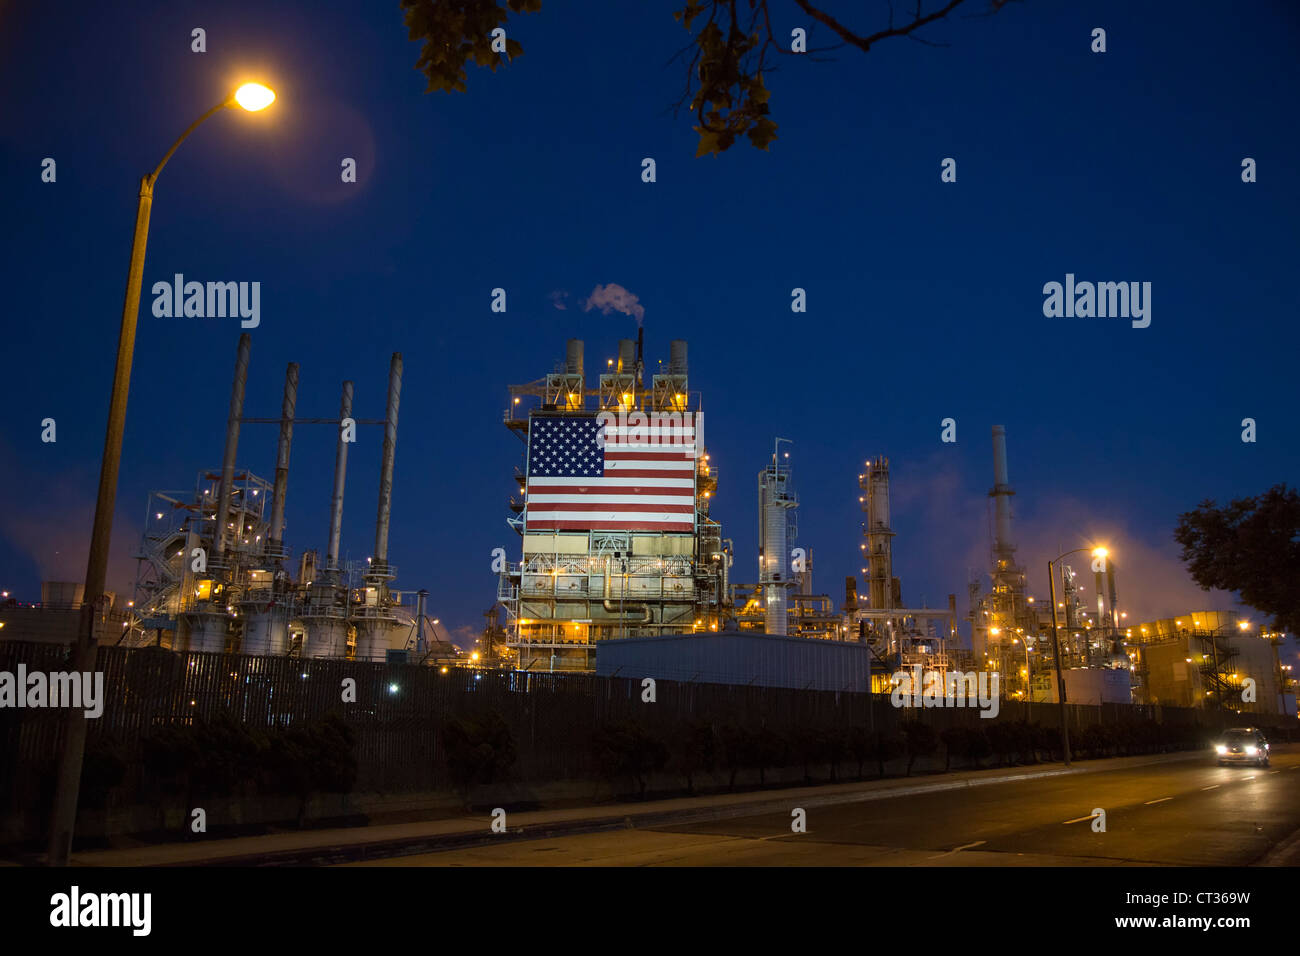 Wilmington, California - An oil refinery, operated by BP, displays a huge American flag. Stock Photo